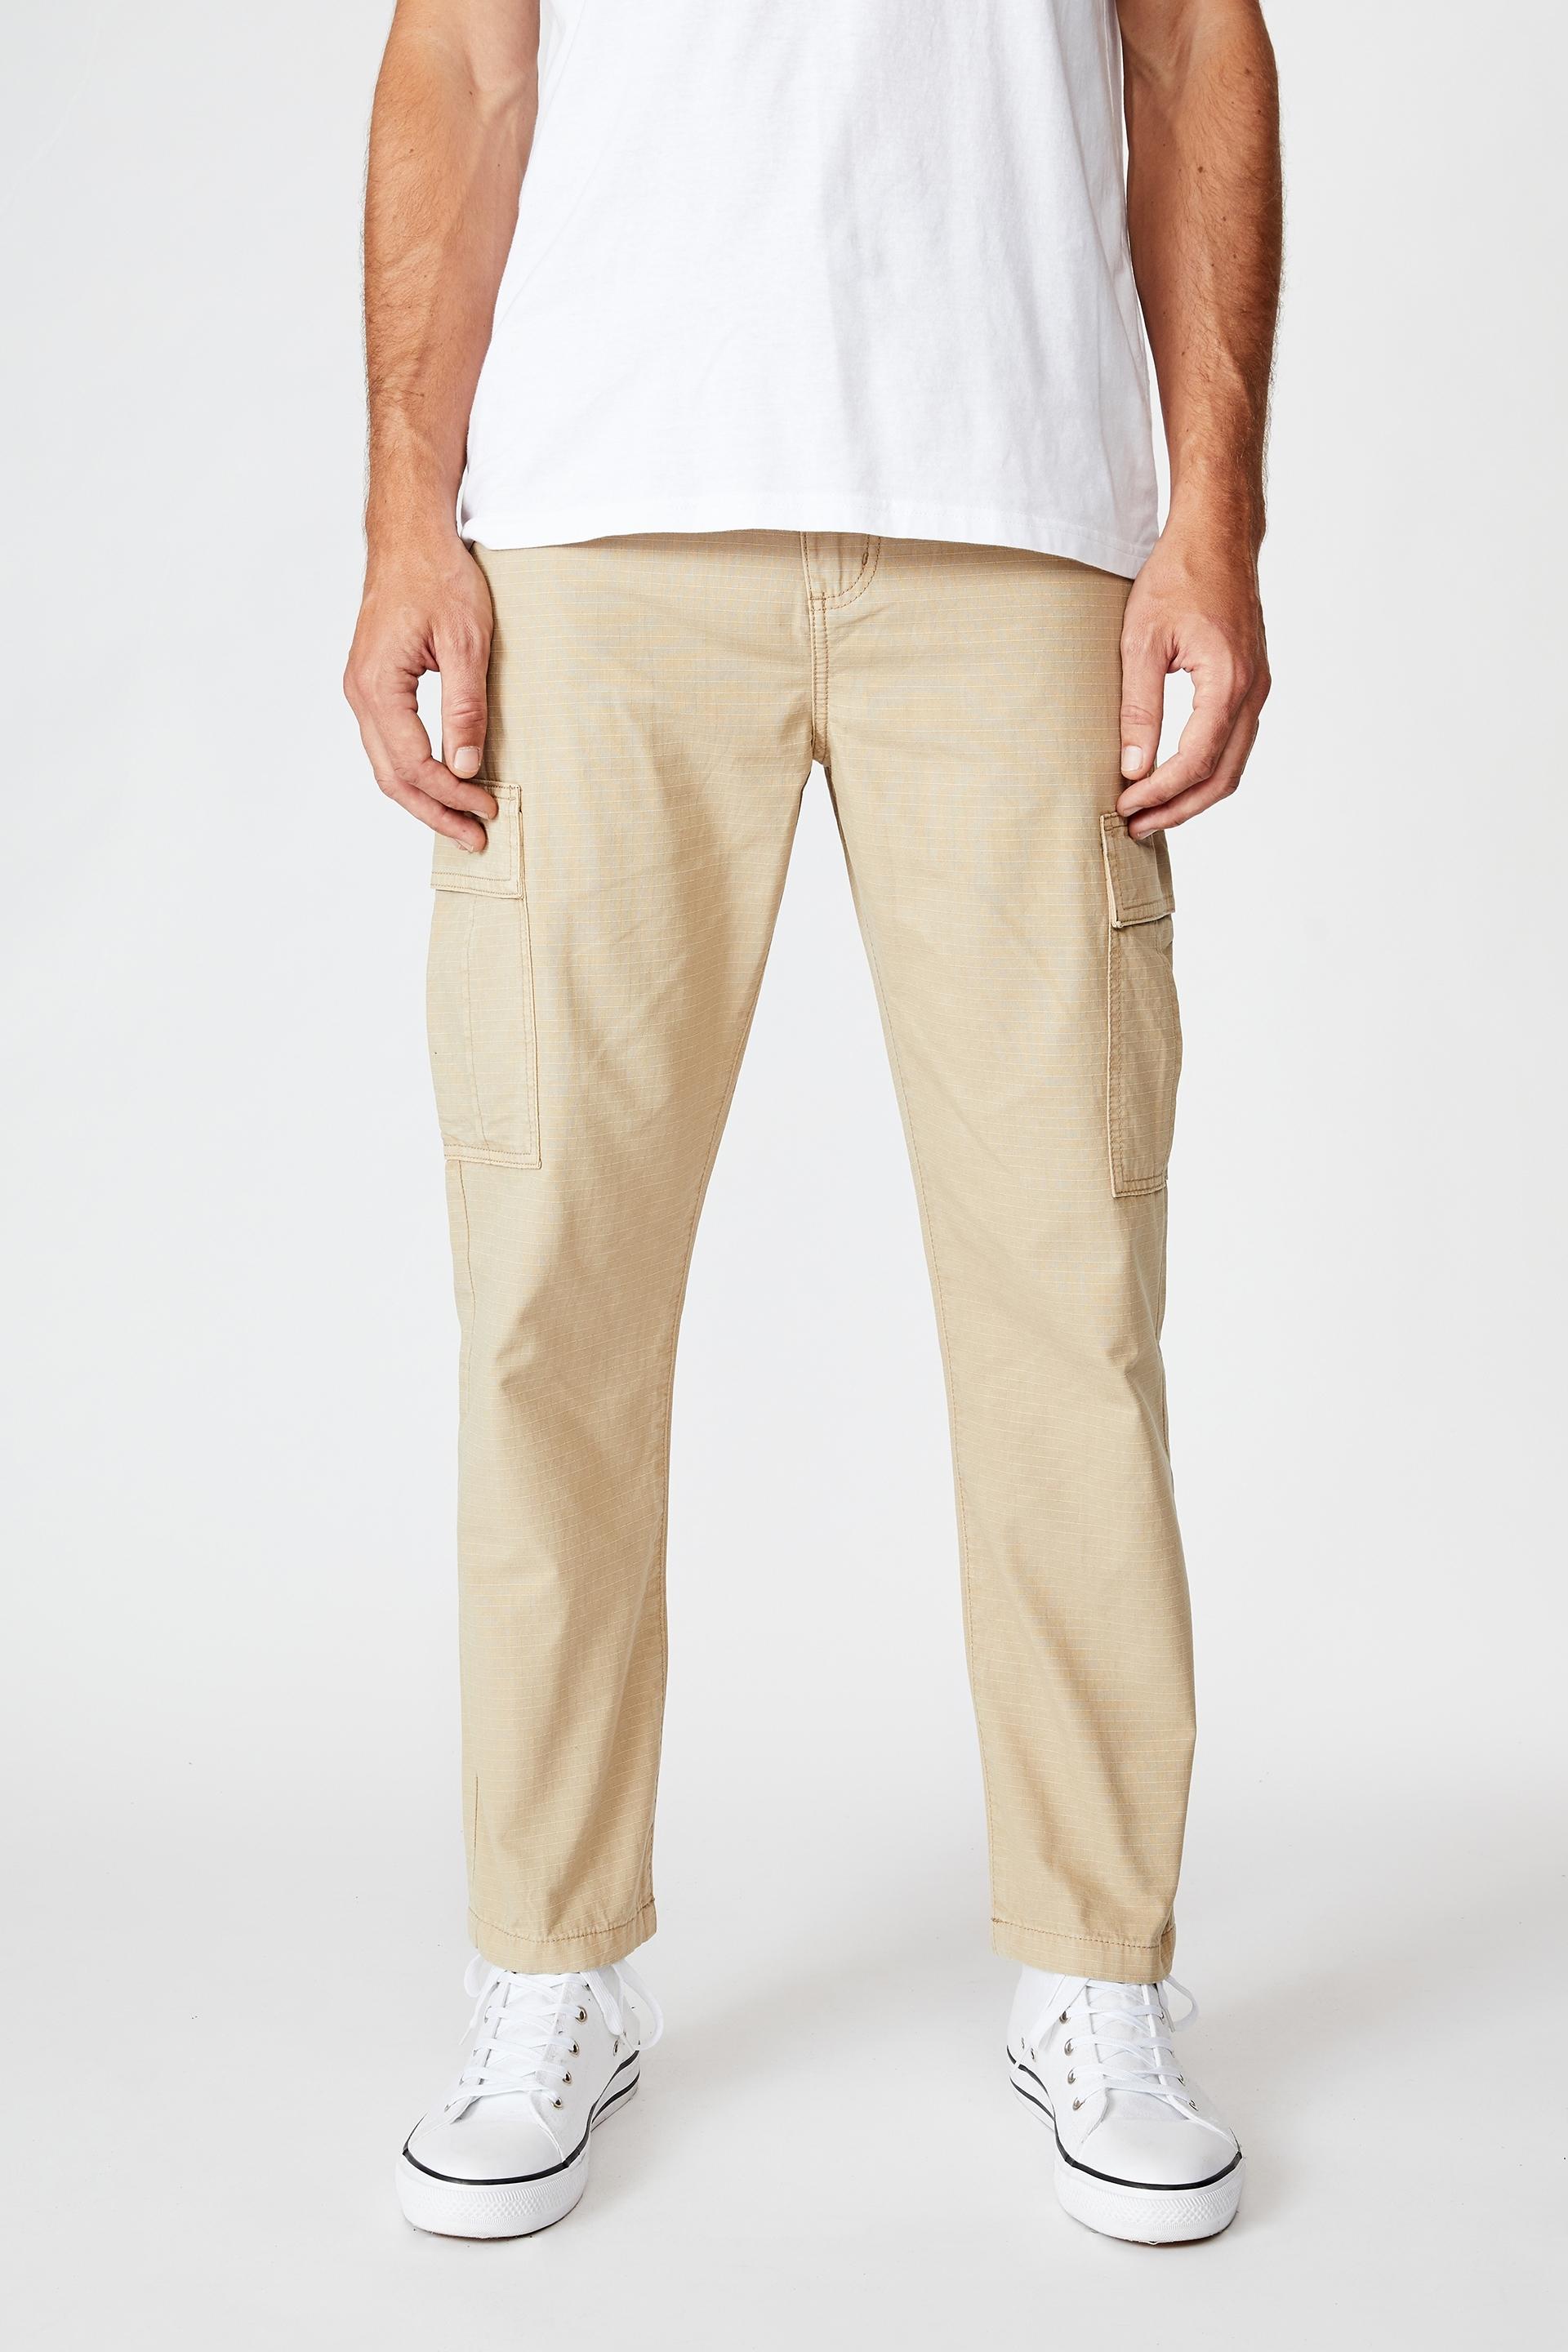 Cargo pant - sand ripstop Cotton On Pants & Chinos | Superbalist.com